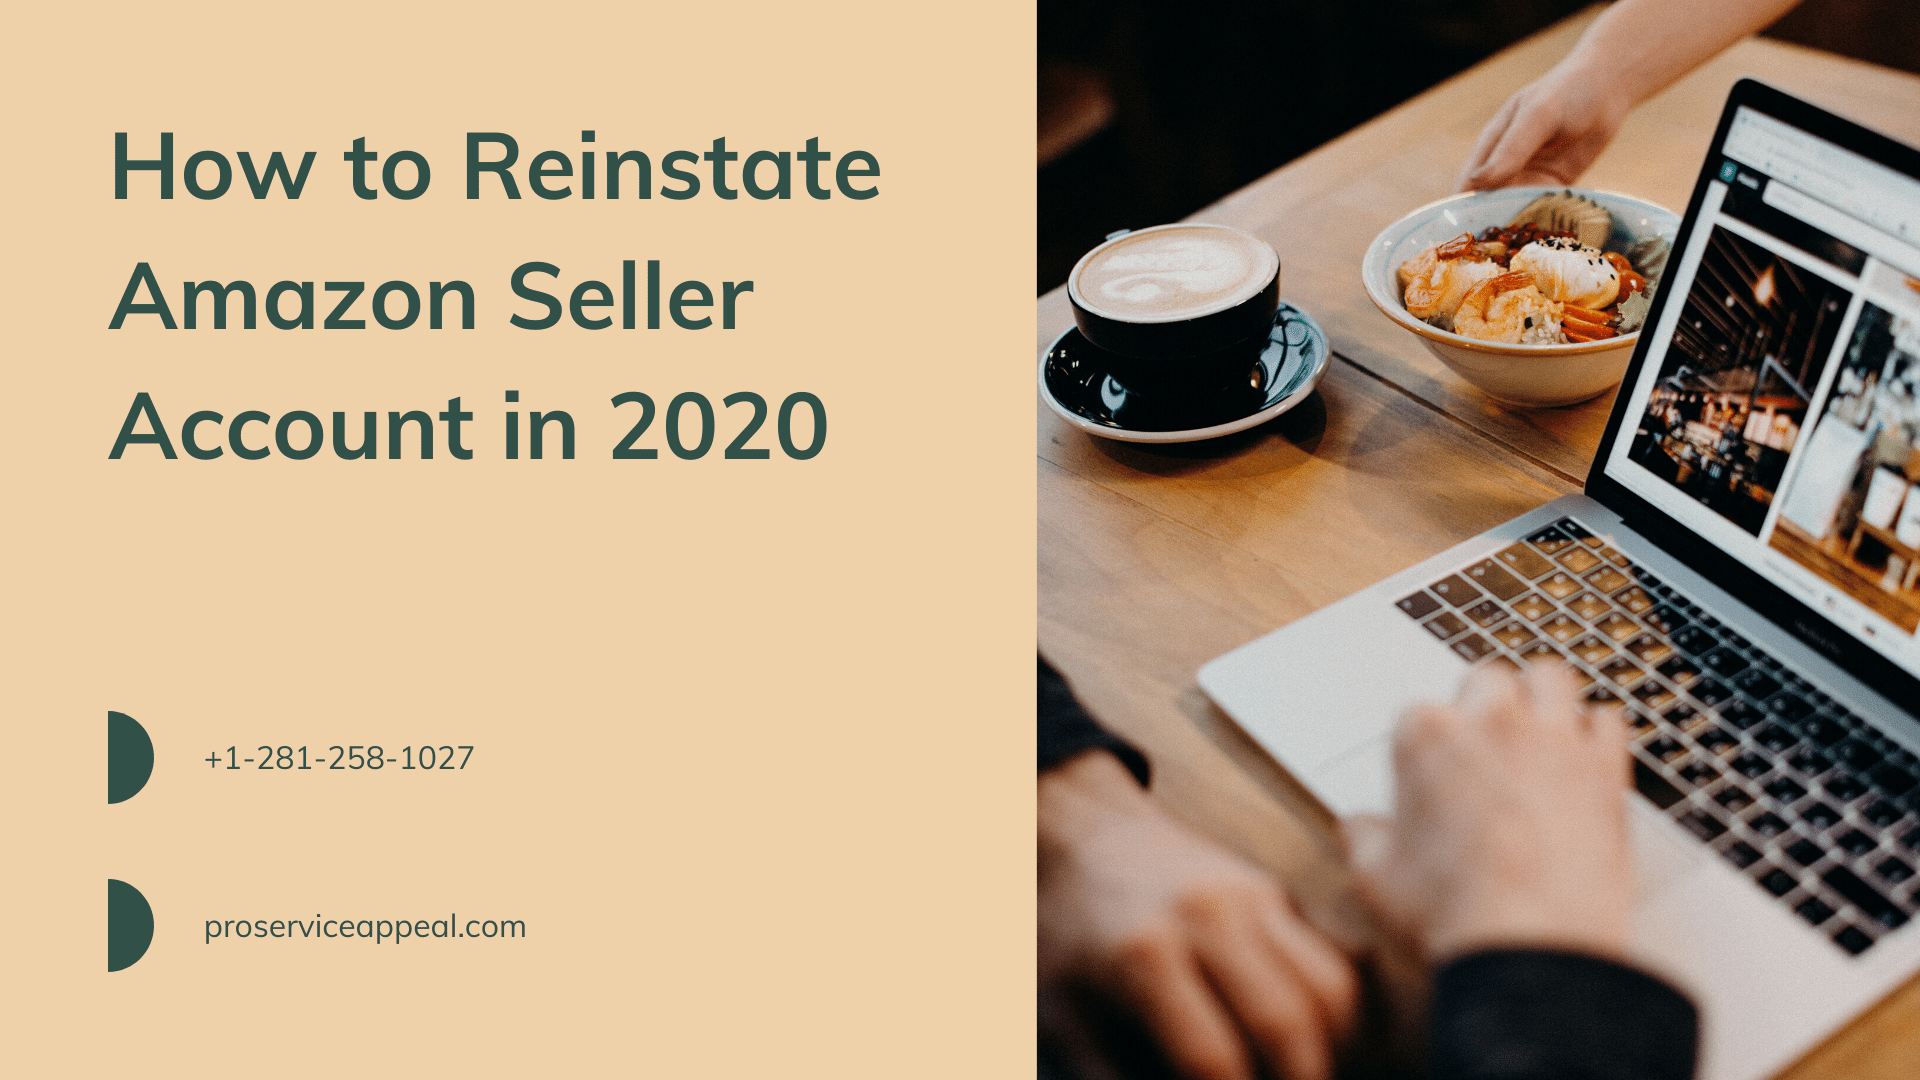 How to Reinstate Amazon Seller Account in 2020?